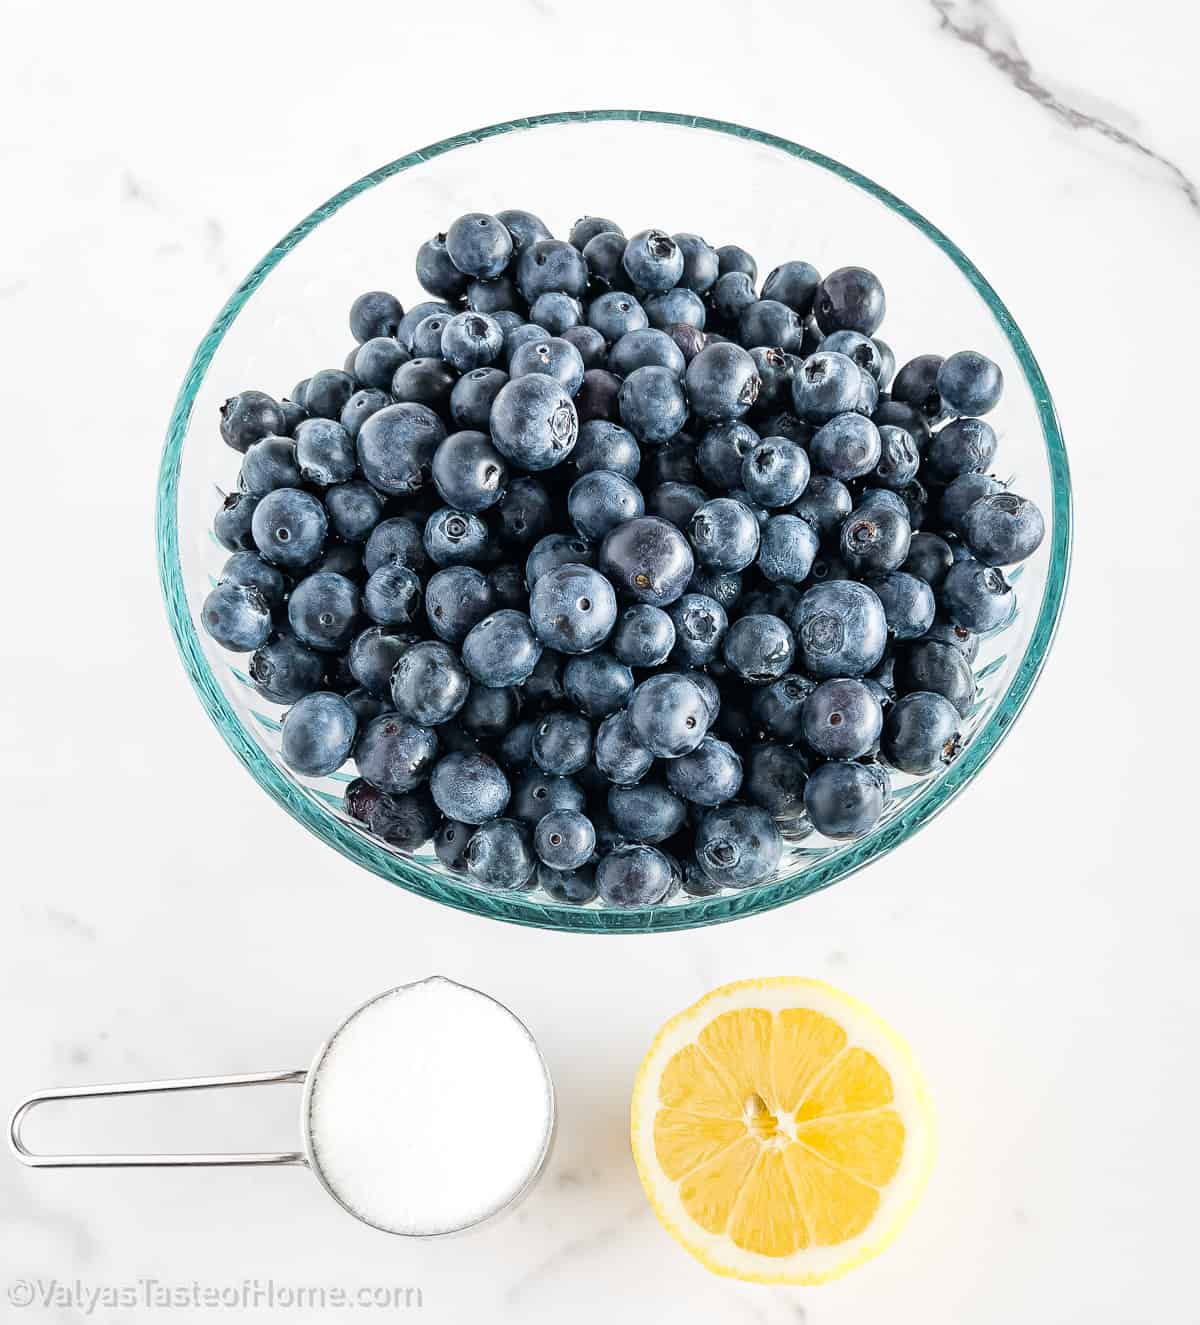 All you need are some simple, pantry staple ingredients to make this delicious Blueberry Coulis at home. 